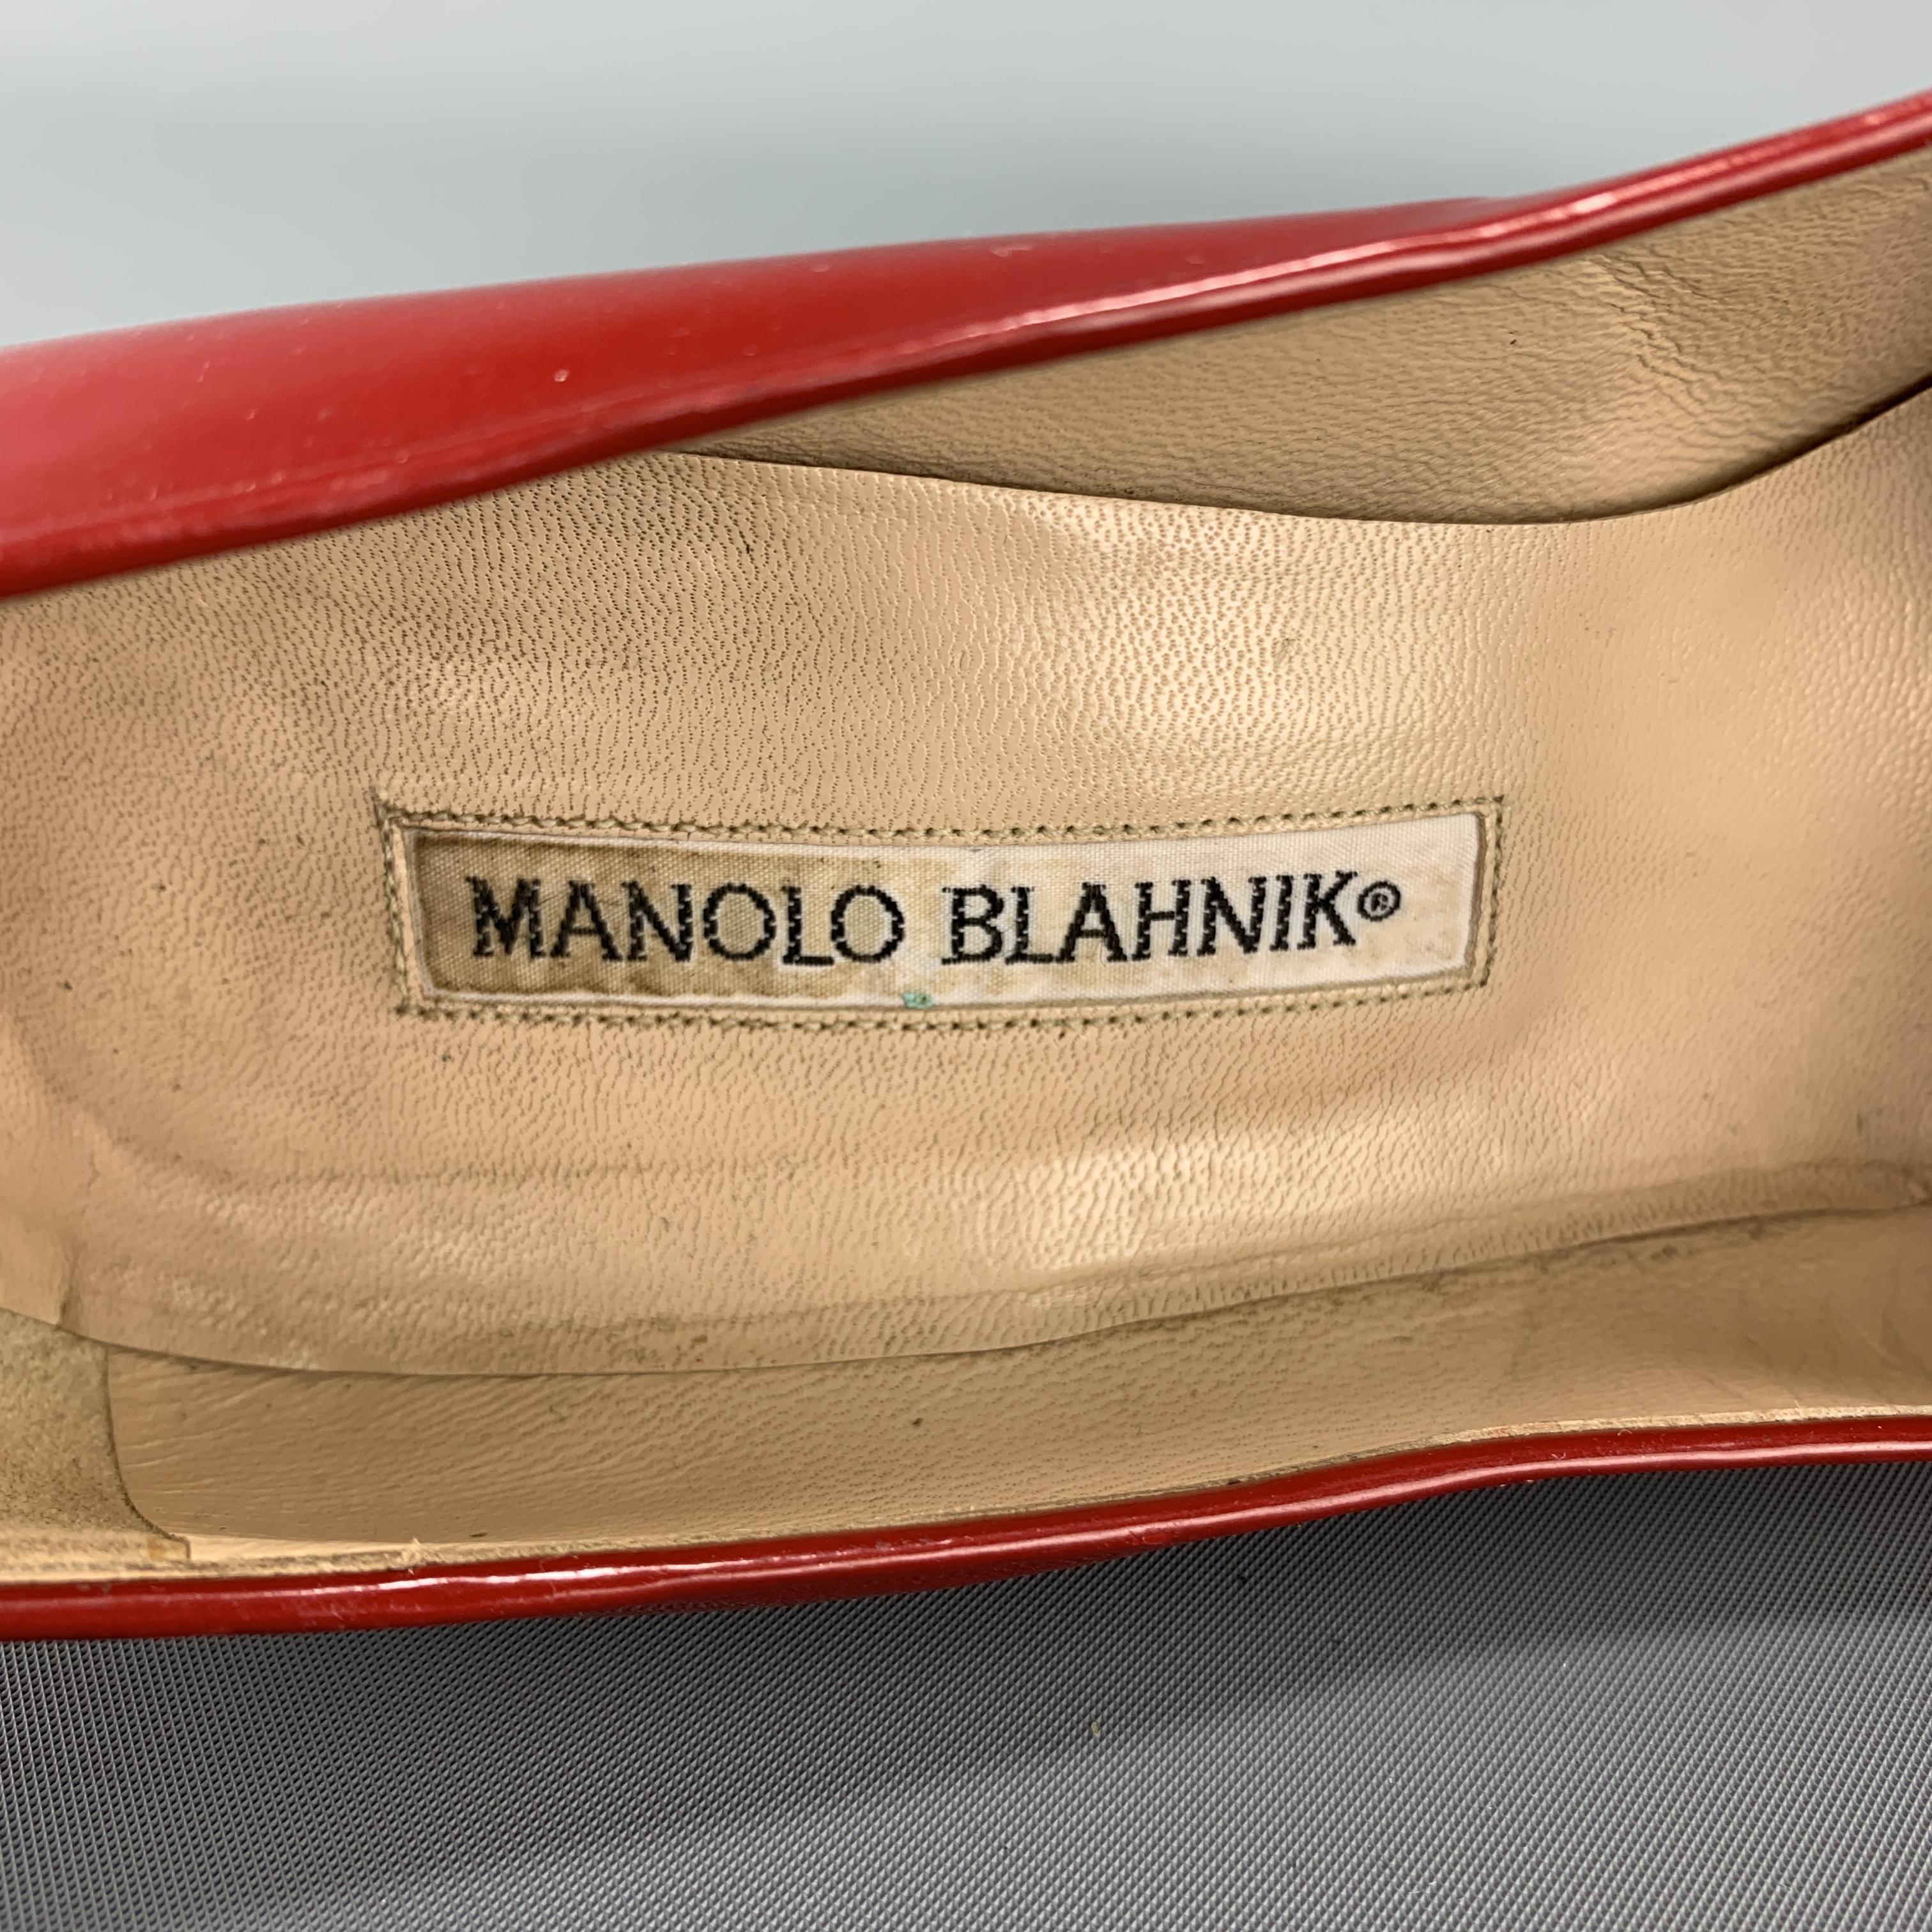 Women's MANOLO BLAHNIK Size 7 Red Patent Leather Ankle Strap Pointed Pump